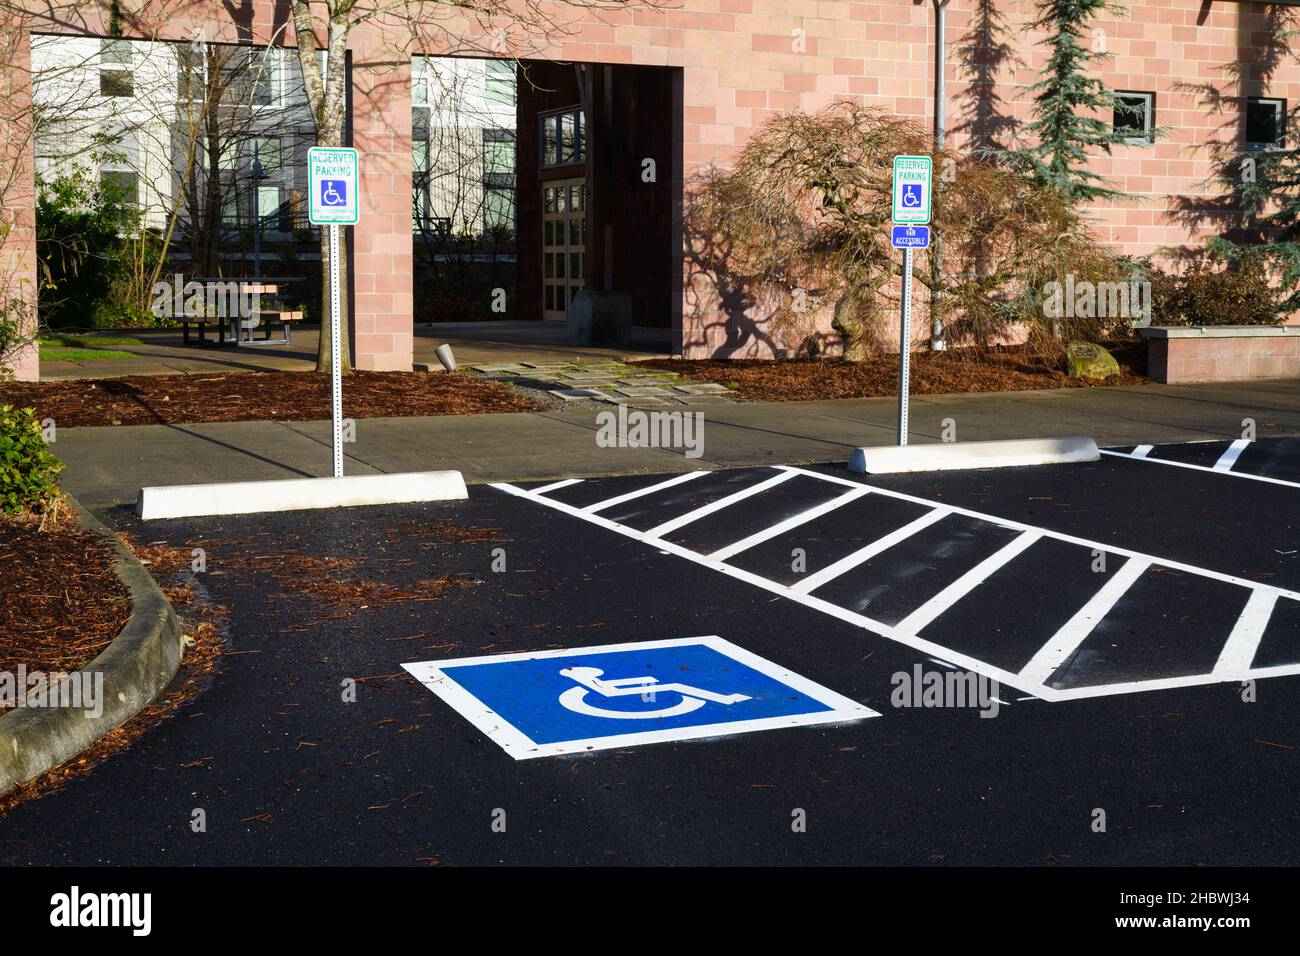 Woodinville, WA, USA - December 19, 2021; State disability parking spaces with road markings and signage in the urban area of Woodinville Washington Stock Photo